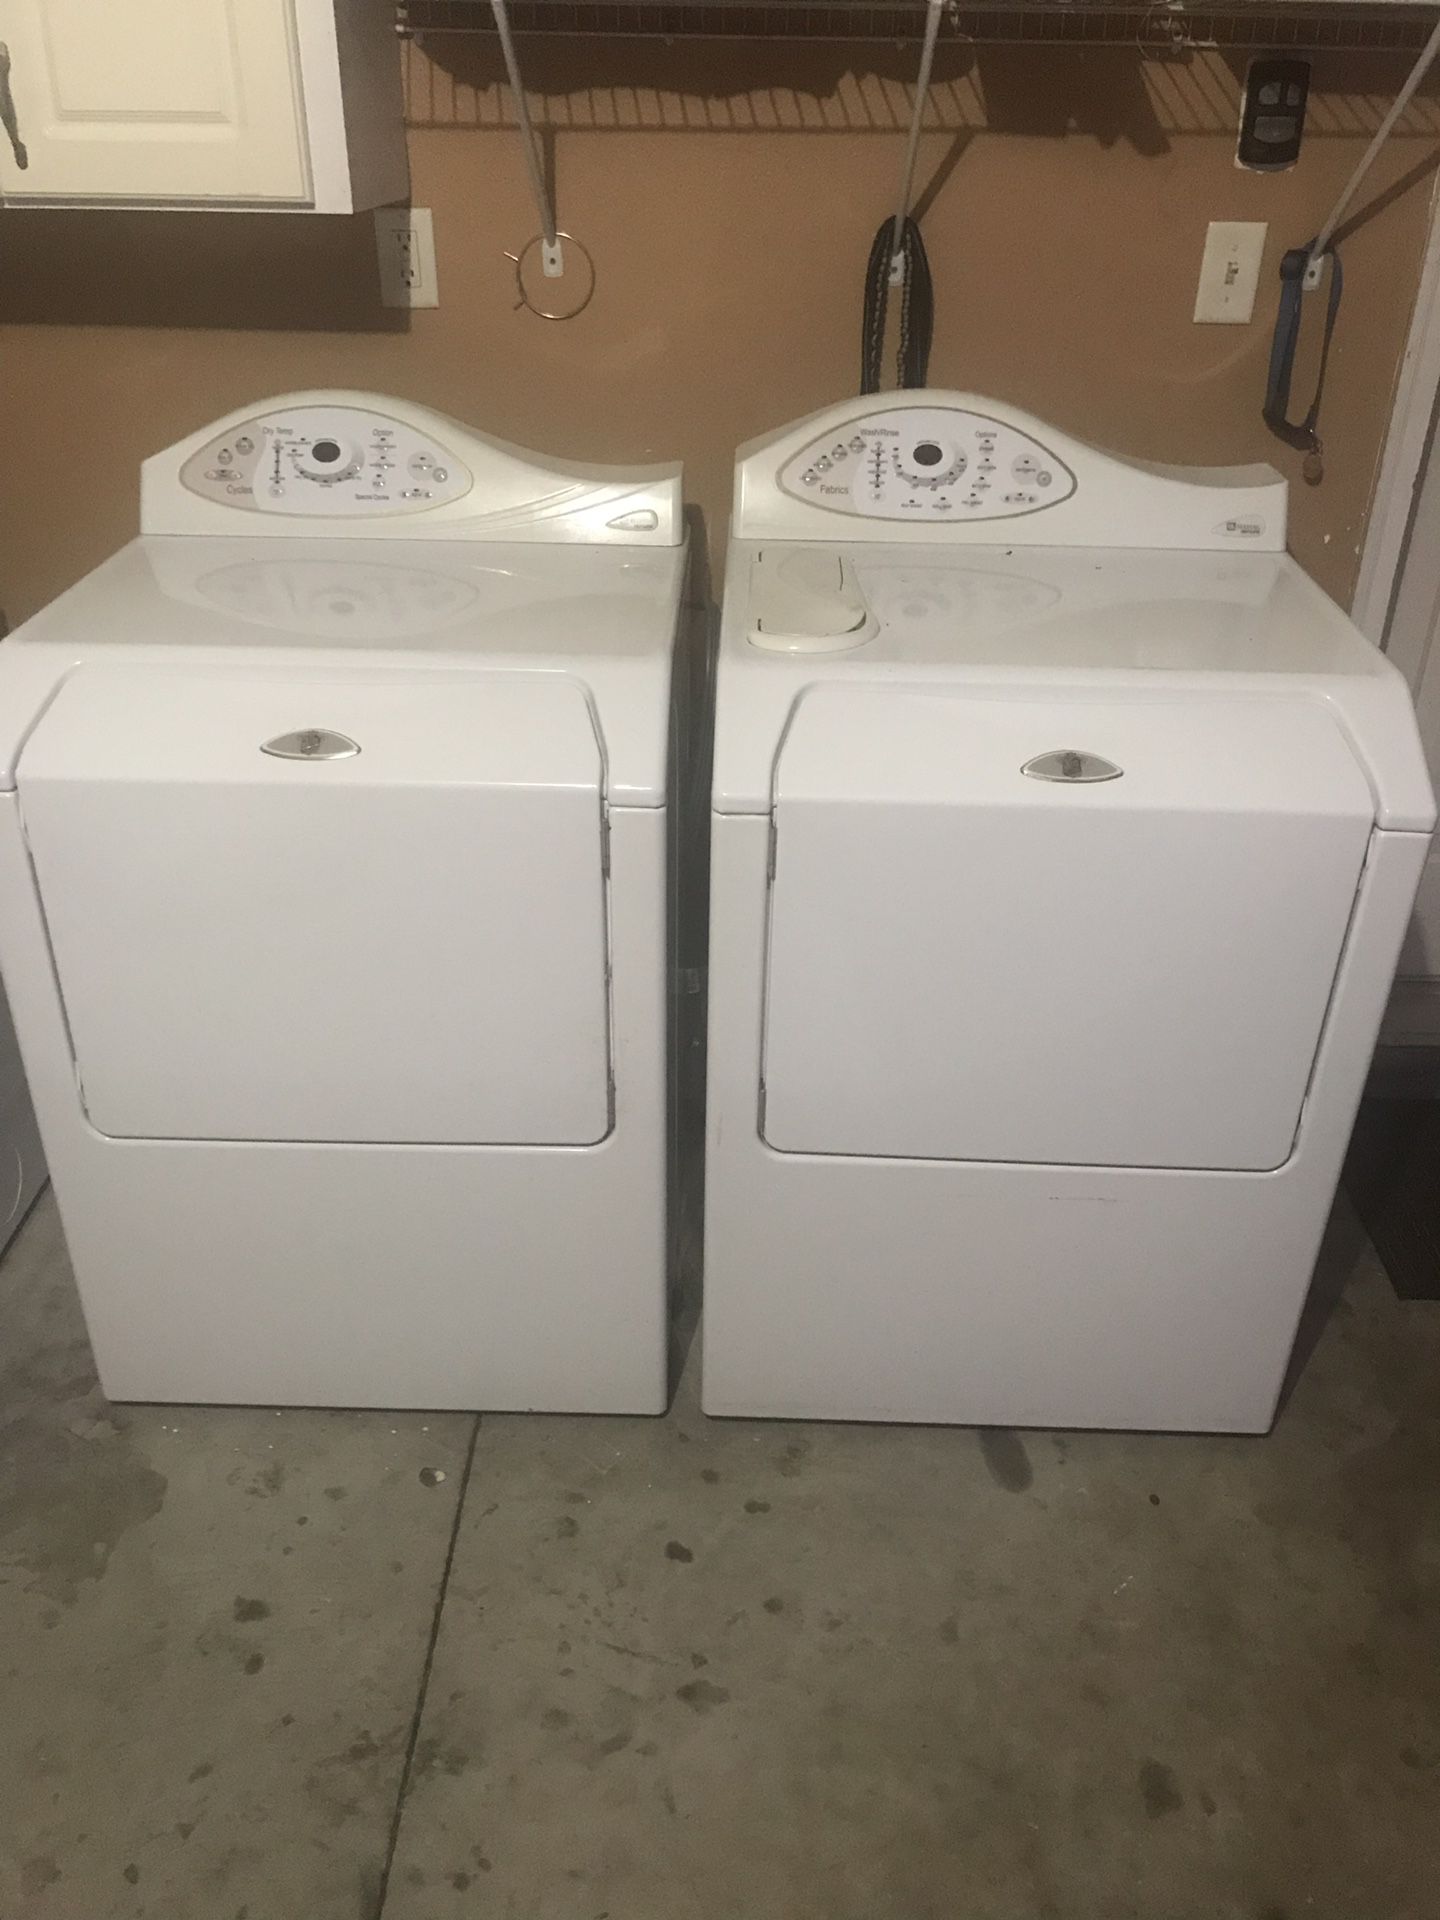 Maytag Neptune washer and dryer